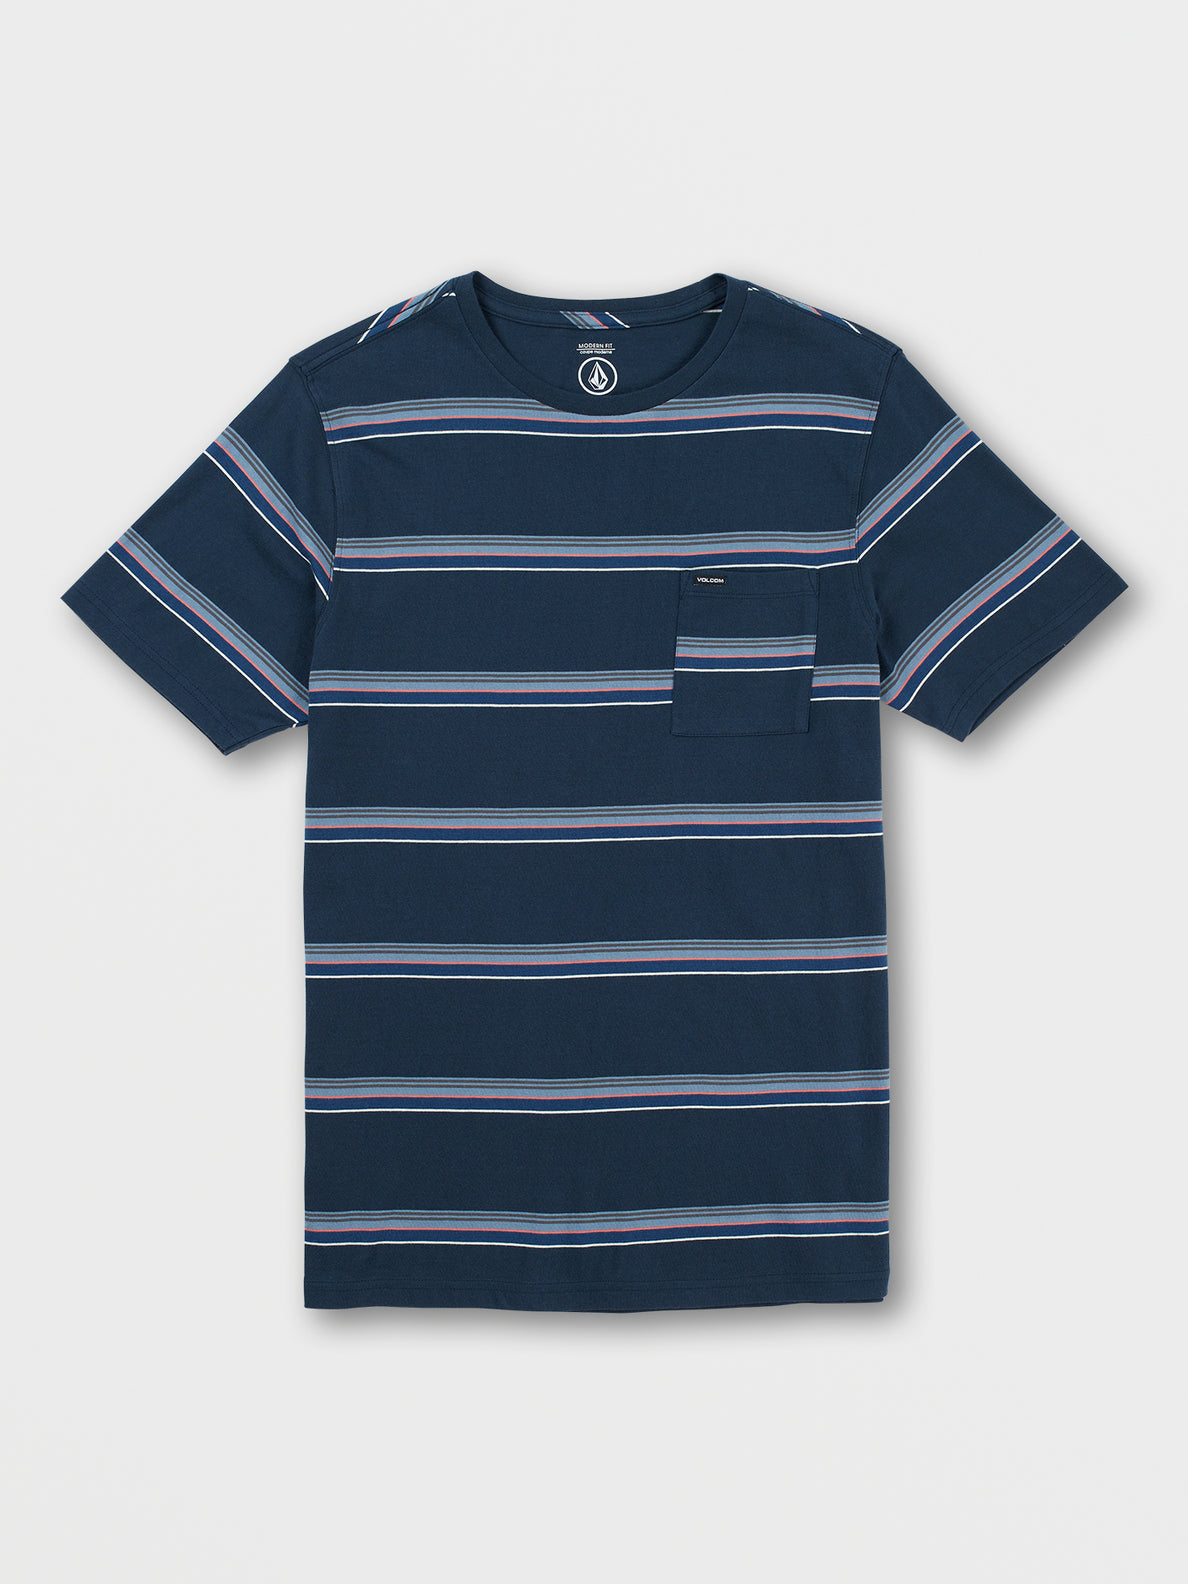 Outstoned Crew Short Sleeve Shirt - Navy (A0142201_NVY) [B]